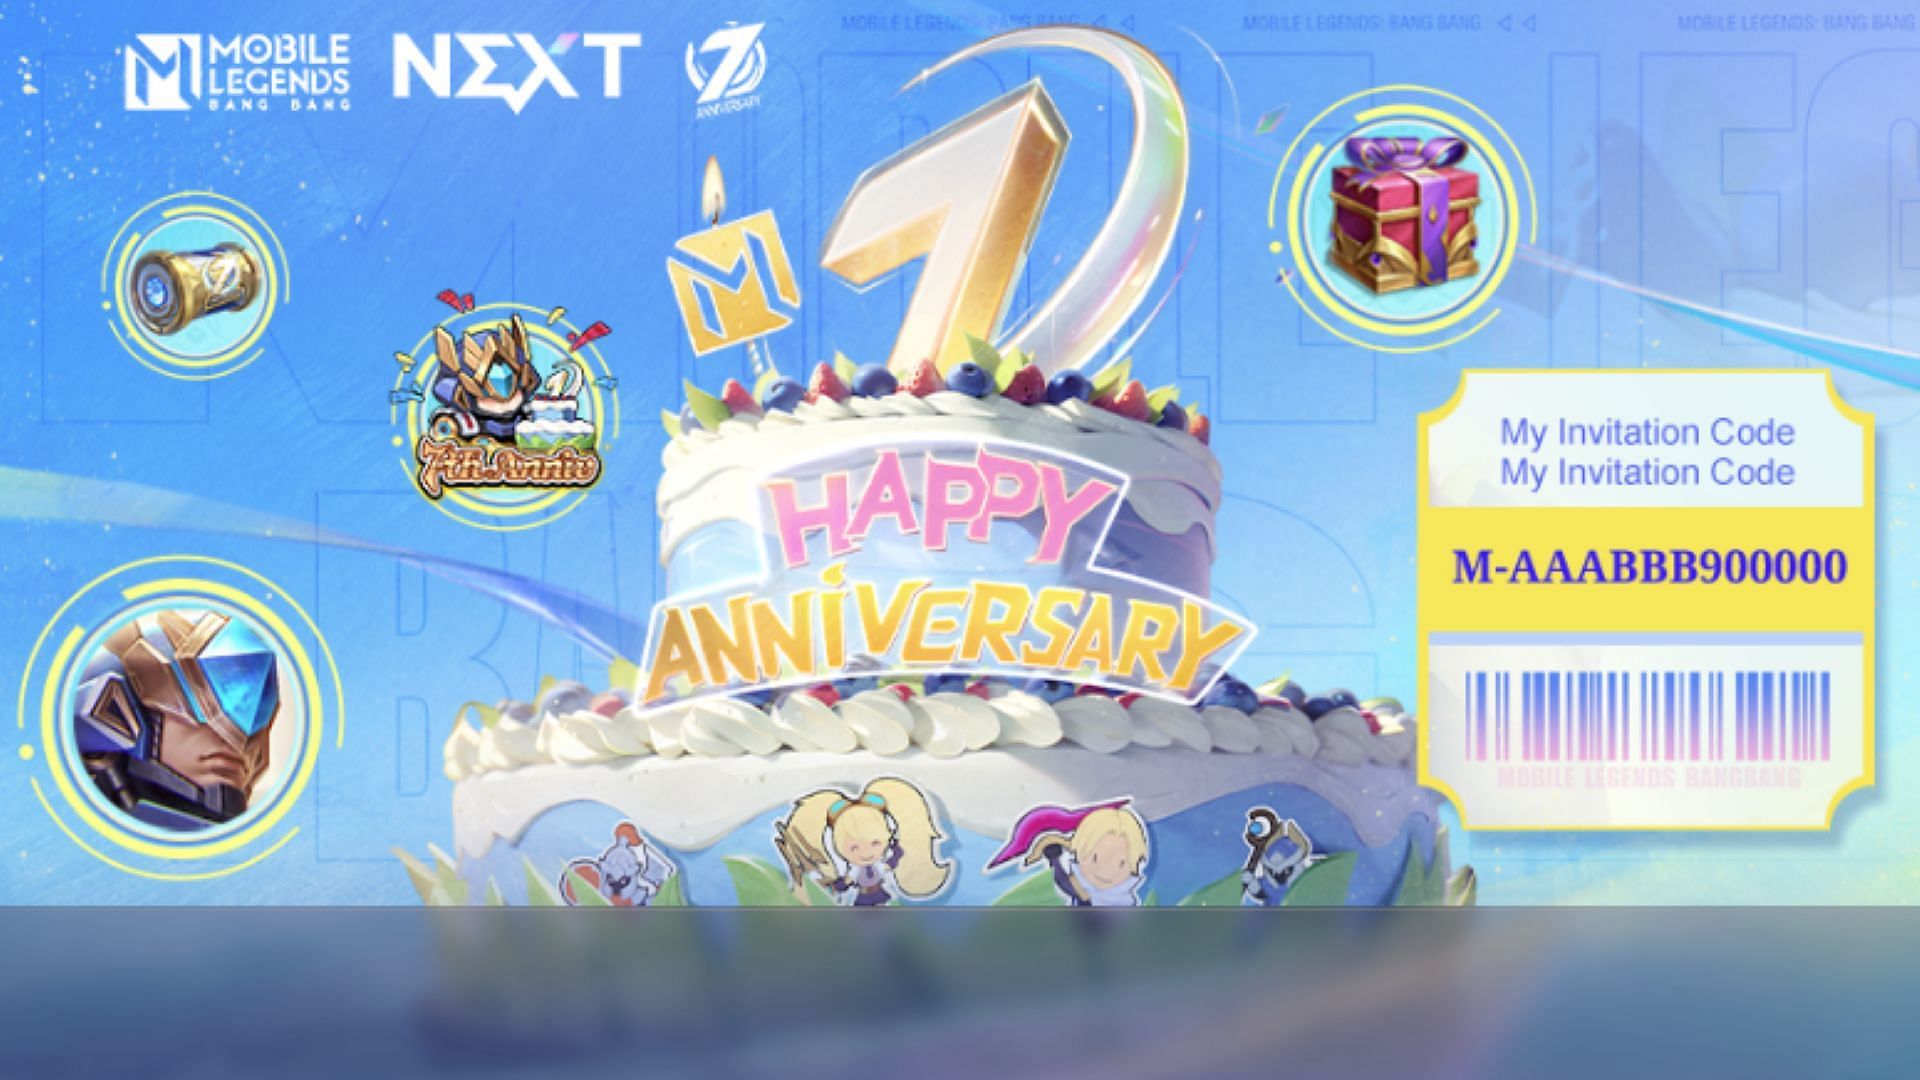 Mobile Legends: Bang Bang gets new logo, revamped UI, and hero reworks for  7th anniversary